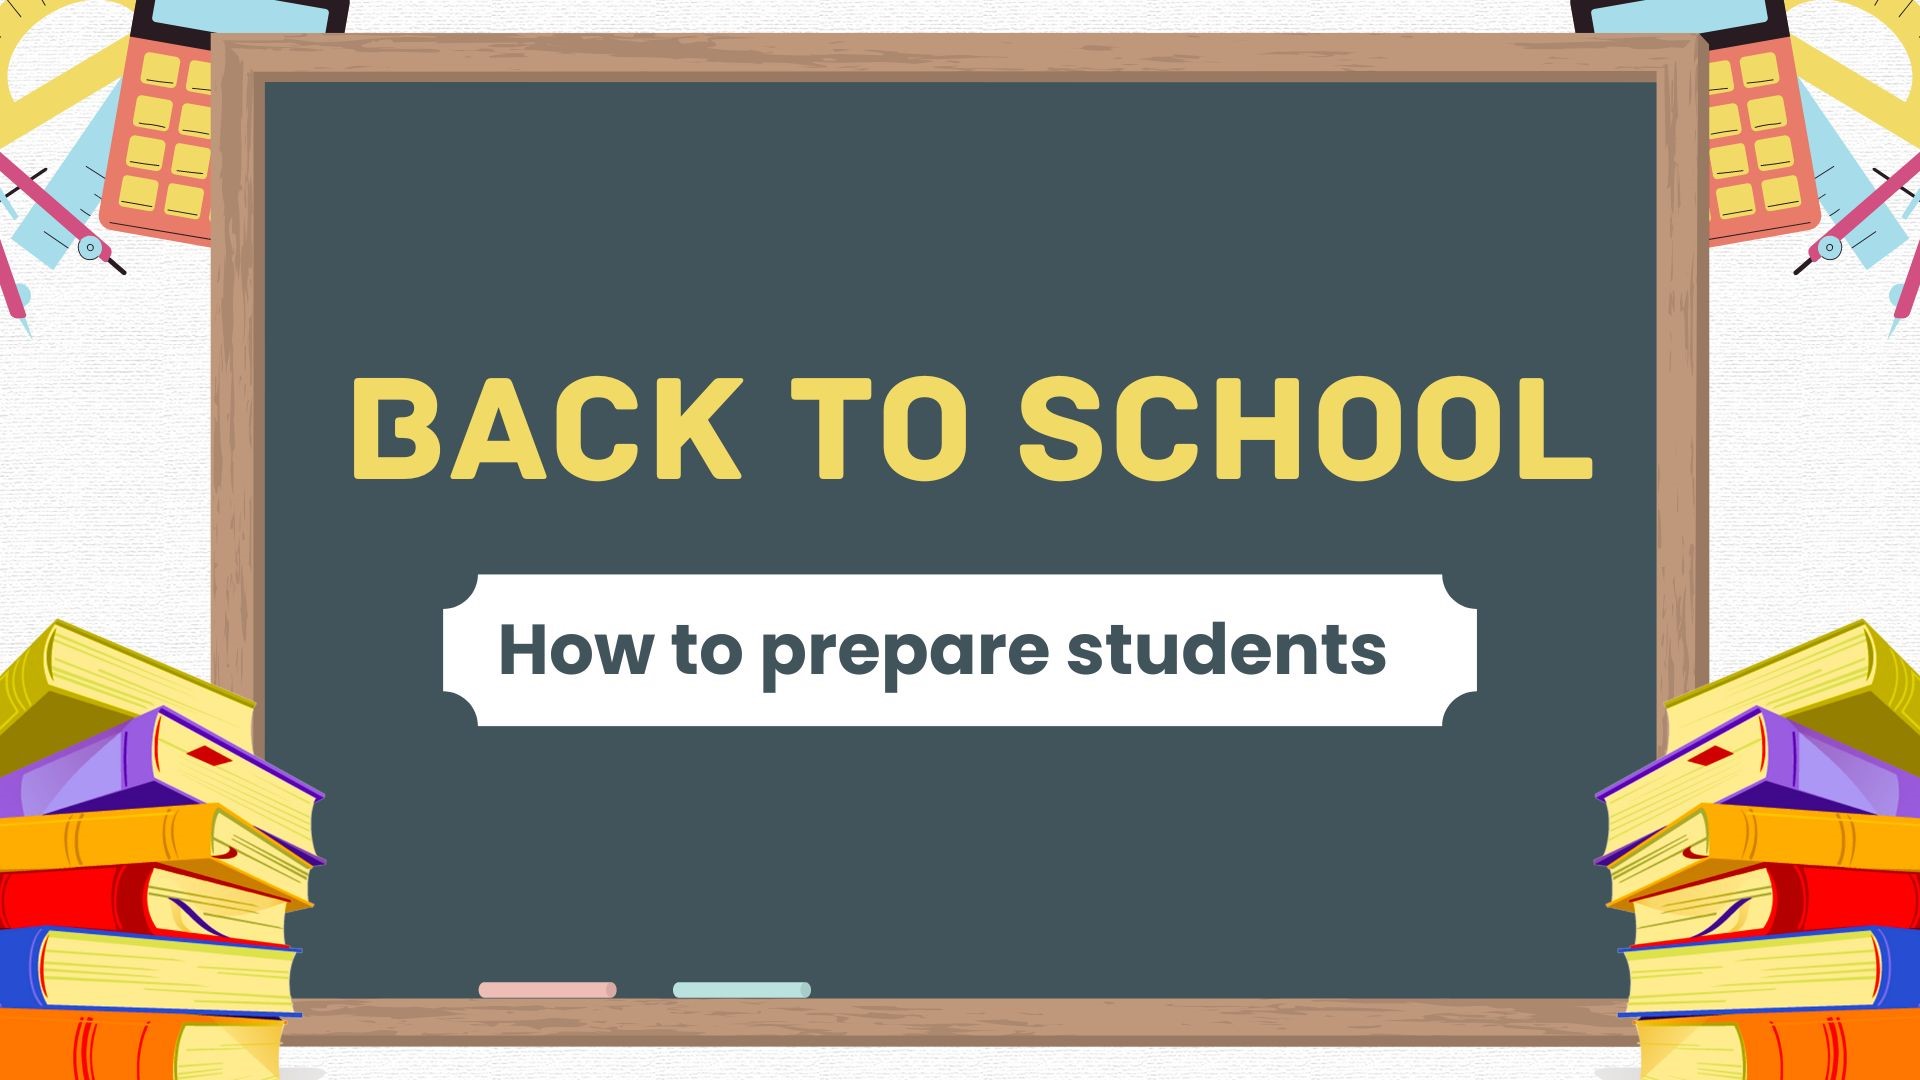 A look at how to prepare your kids for the return to school, from conversations to hold to readjusting schedules and expectations.